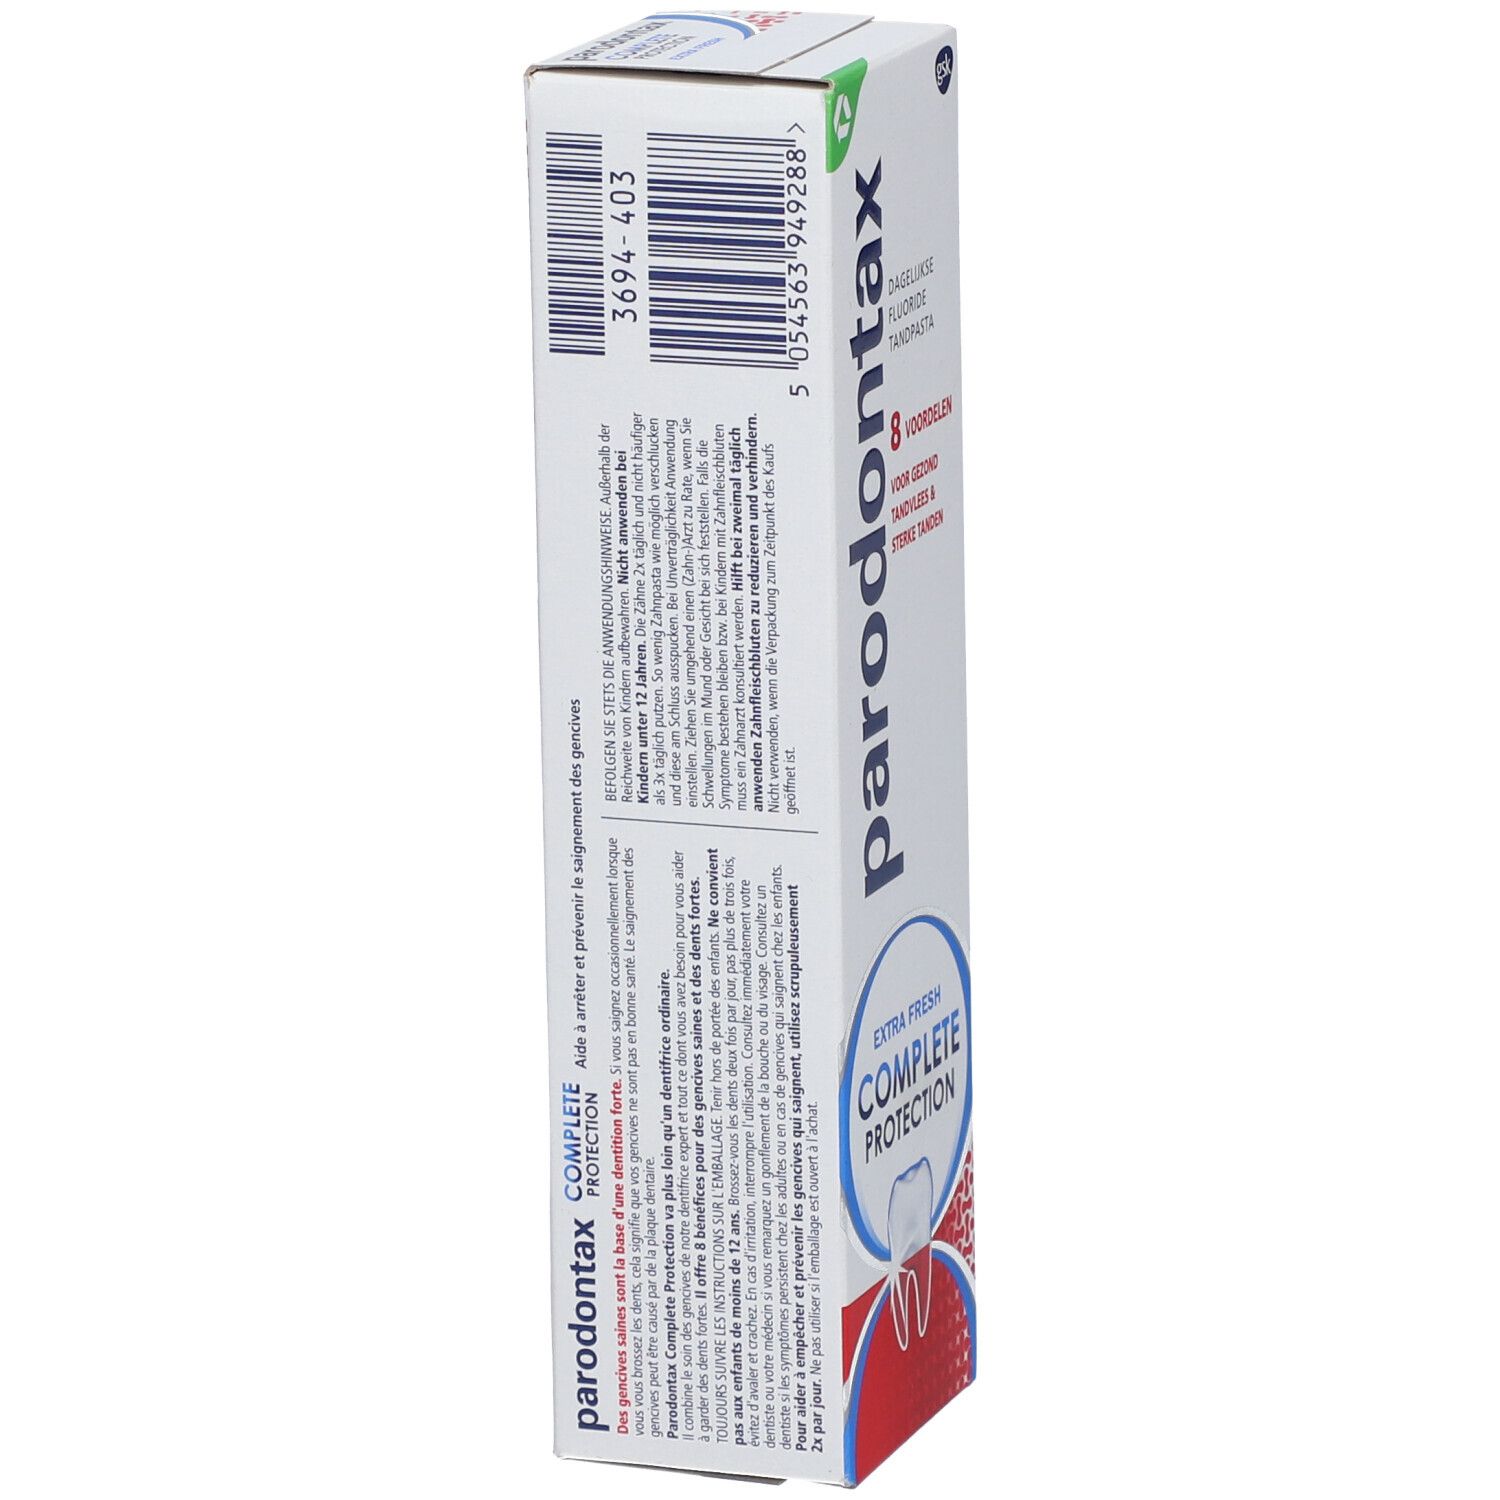 parodontax Dentifrice Complete Protection Extra Fresh